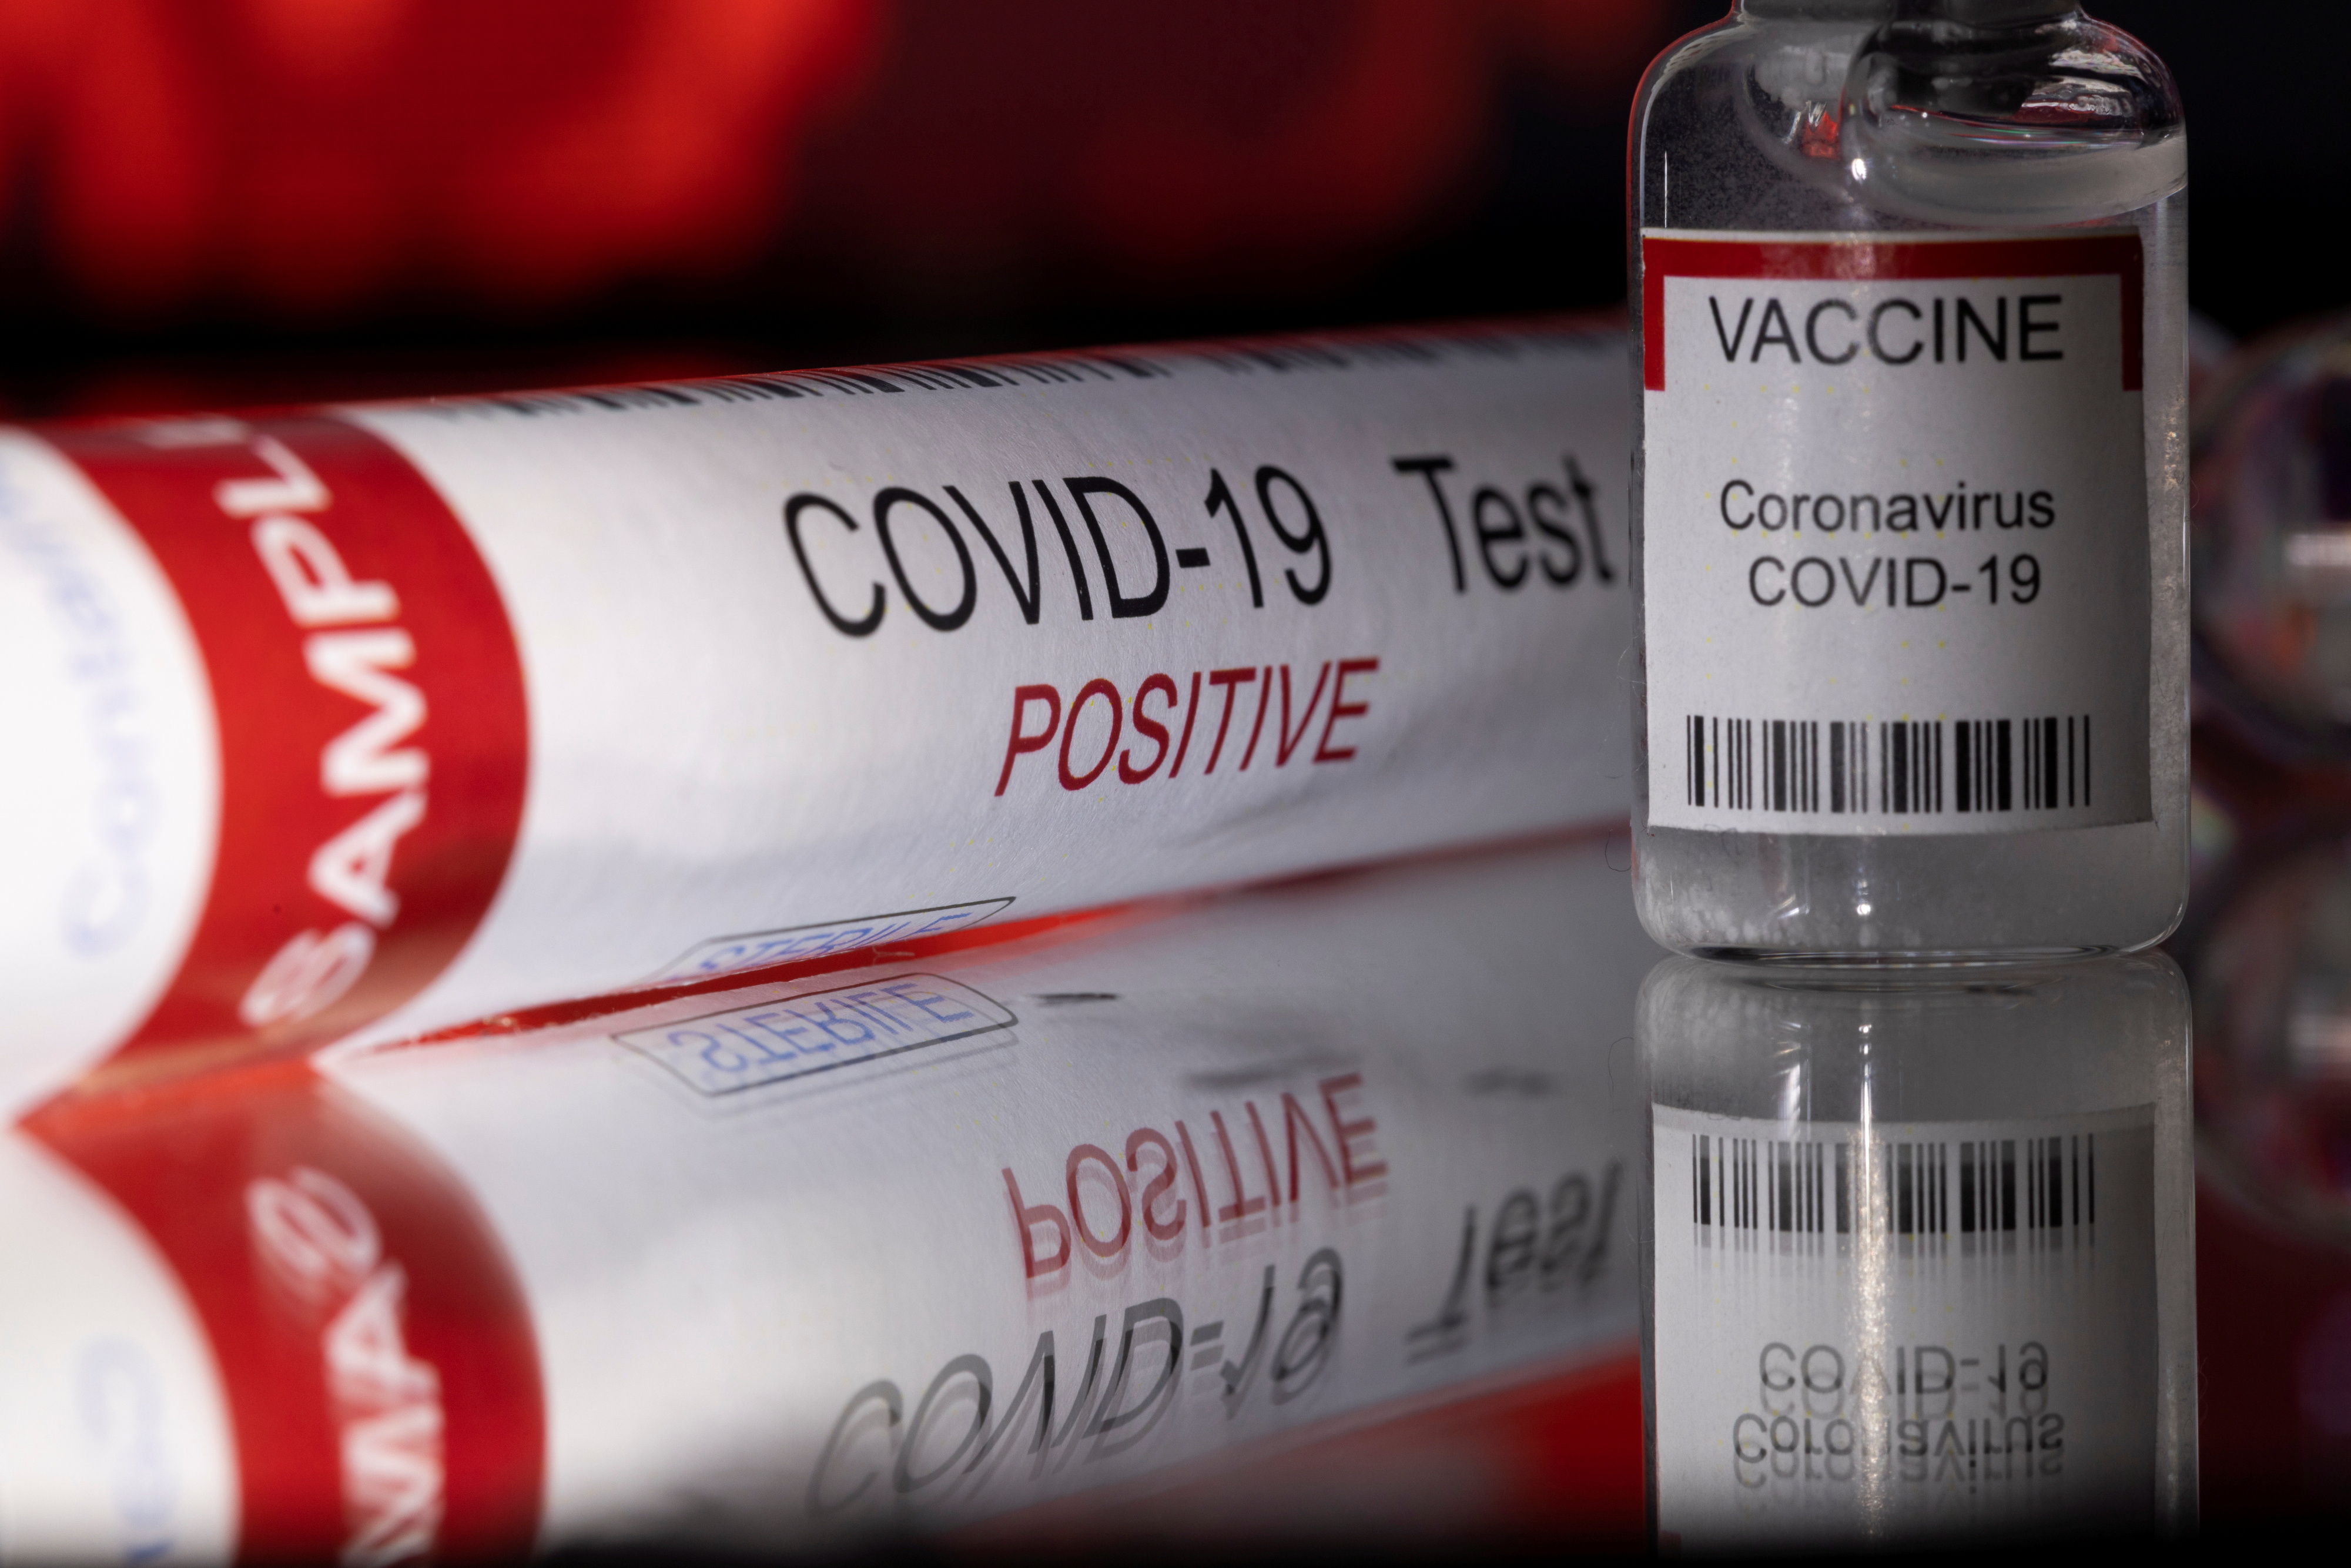 Illustration shows a test tube labelled "COVID-19 Test positive" and a vial labelled "VACCINE Coronavirus COVID-19\